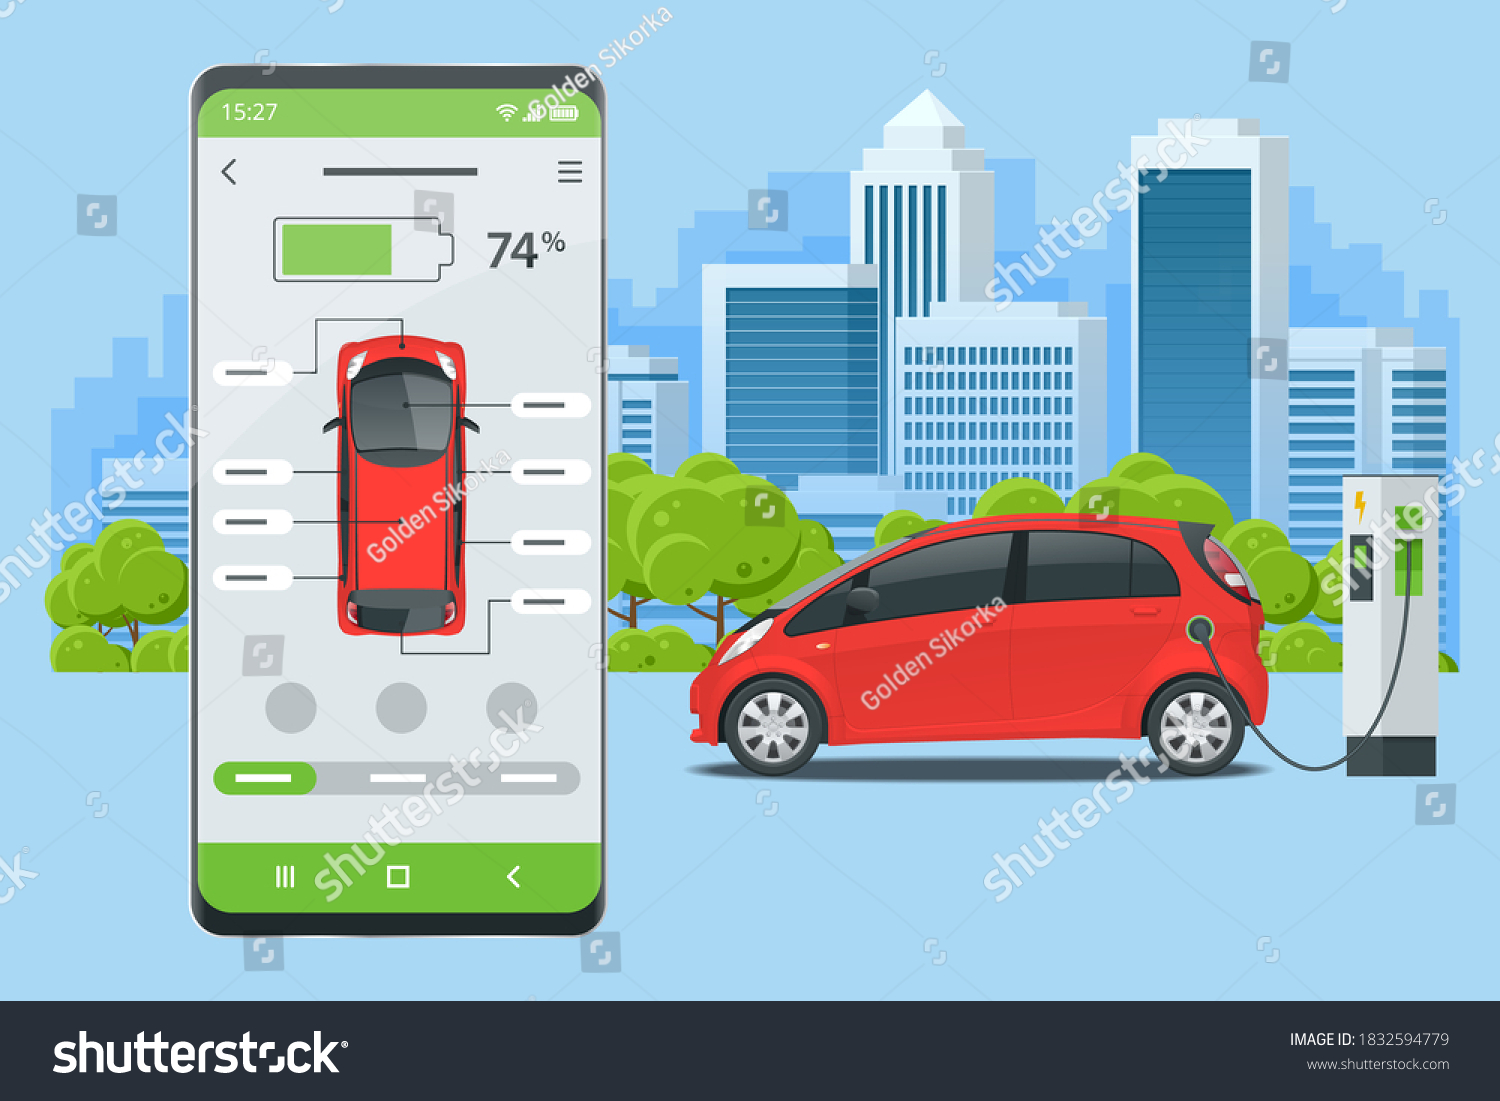 SVG of Concept of electric vehicle charge, mobile application for charge management. Car fuel manager smartphone interface. svg